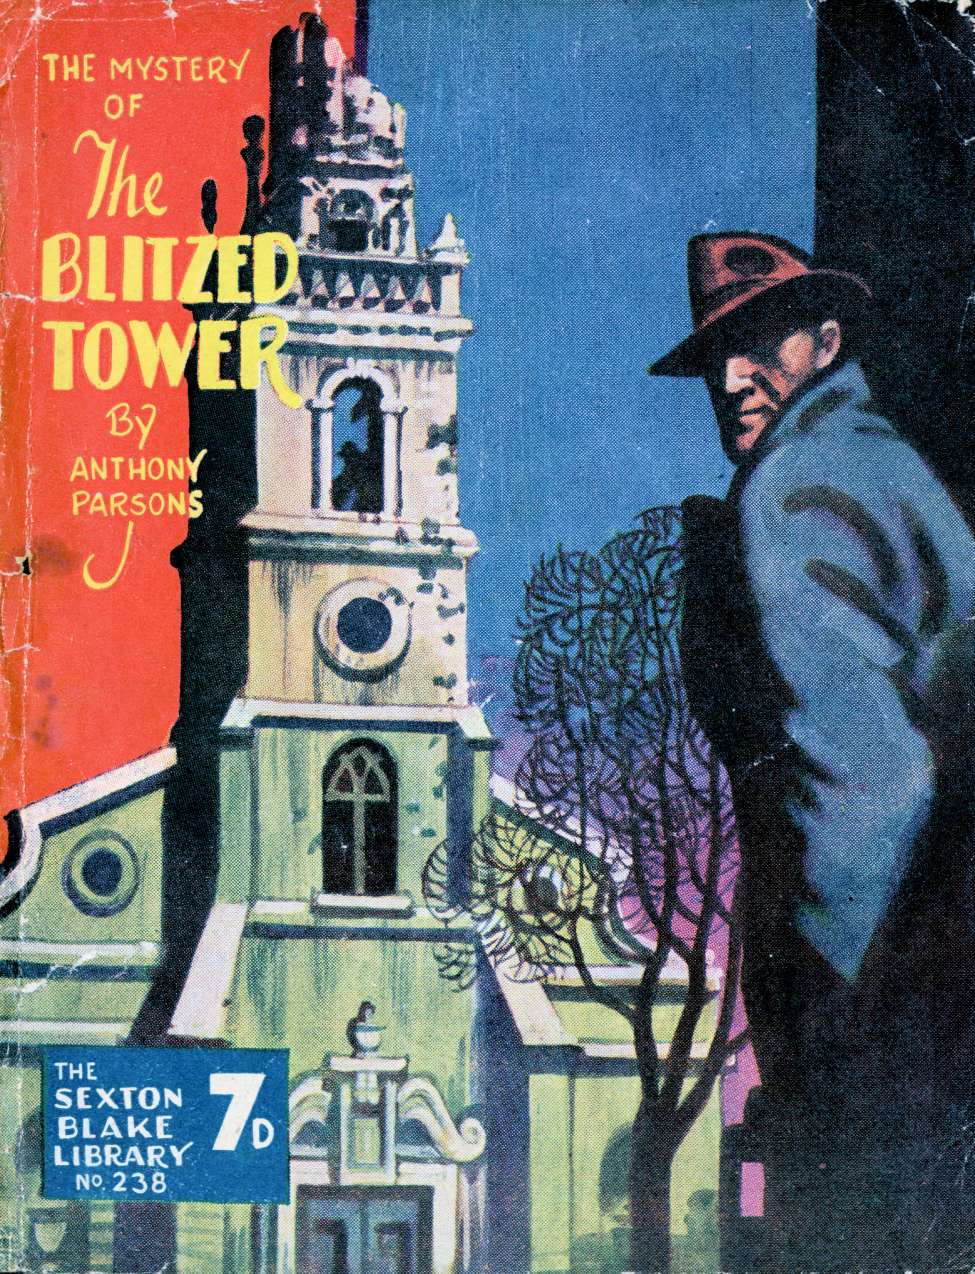 Comic Book Cover For Sexton Blake Library S3 238 - The Mystery Of The Blitzed Tower